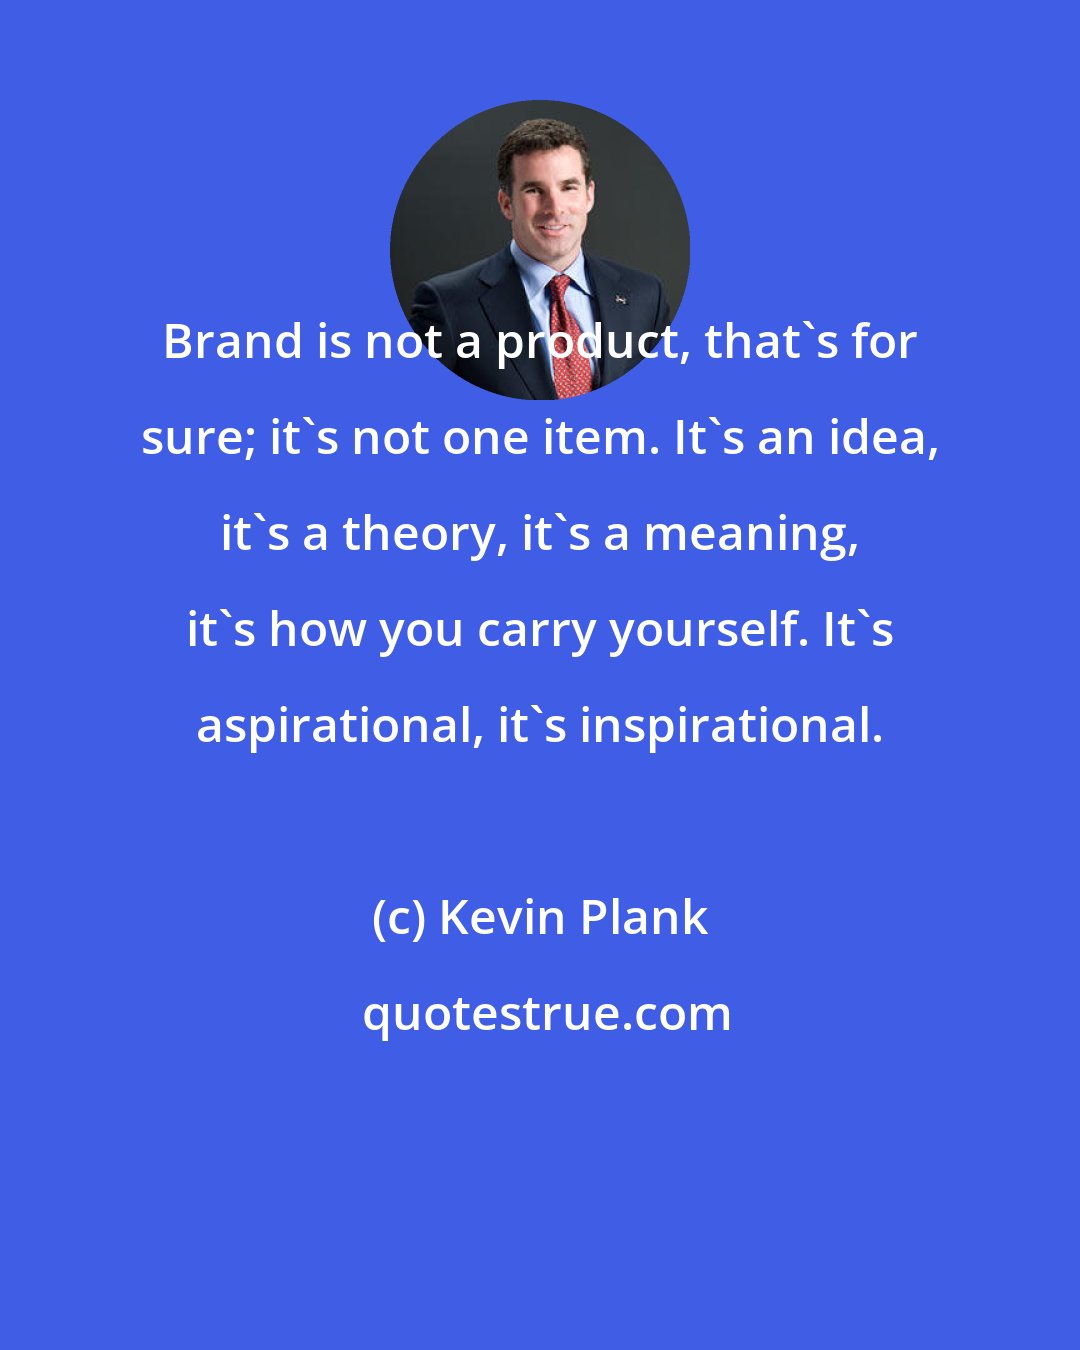 Kevin Plank: Brand is not a product, that's for sure; it's not one item. It's an idea, it's a theory, it's a meaning, it's how you carry yourself. It's aspirational, it's inspirational.